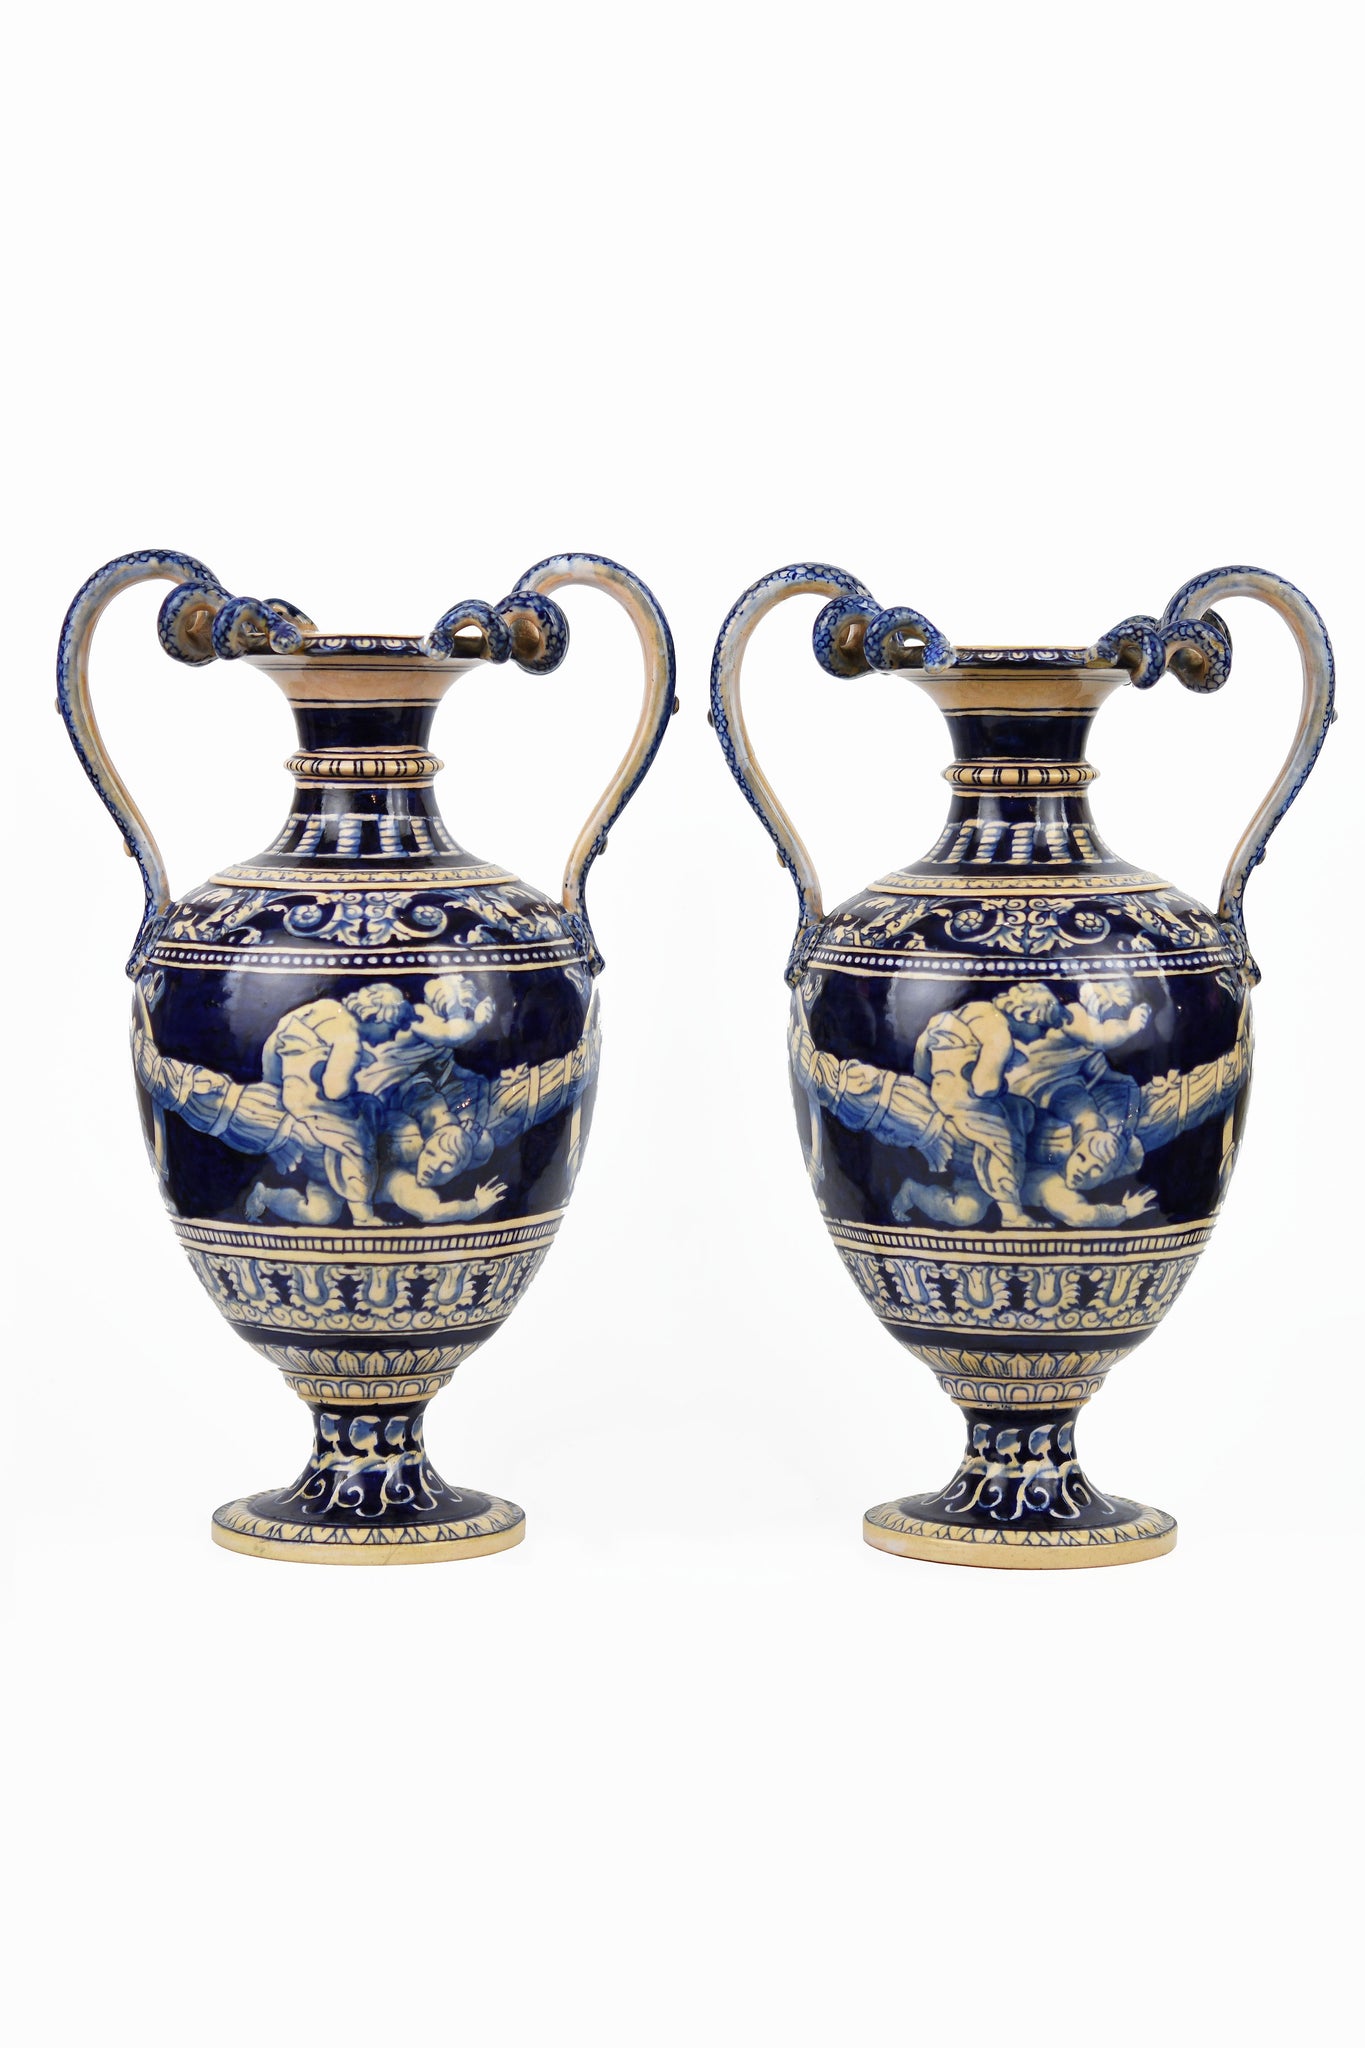 Pair of Minton Renaissance Revival Vases .c.1862 Designed by Alfred Stevens, Painted by Thomas Kirkby